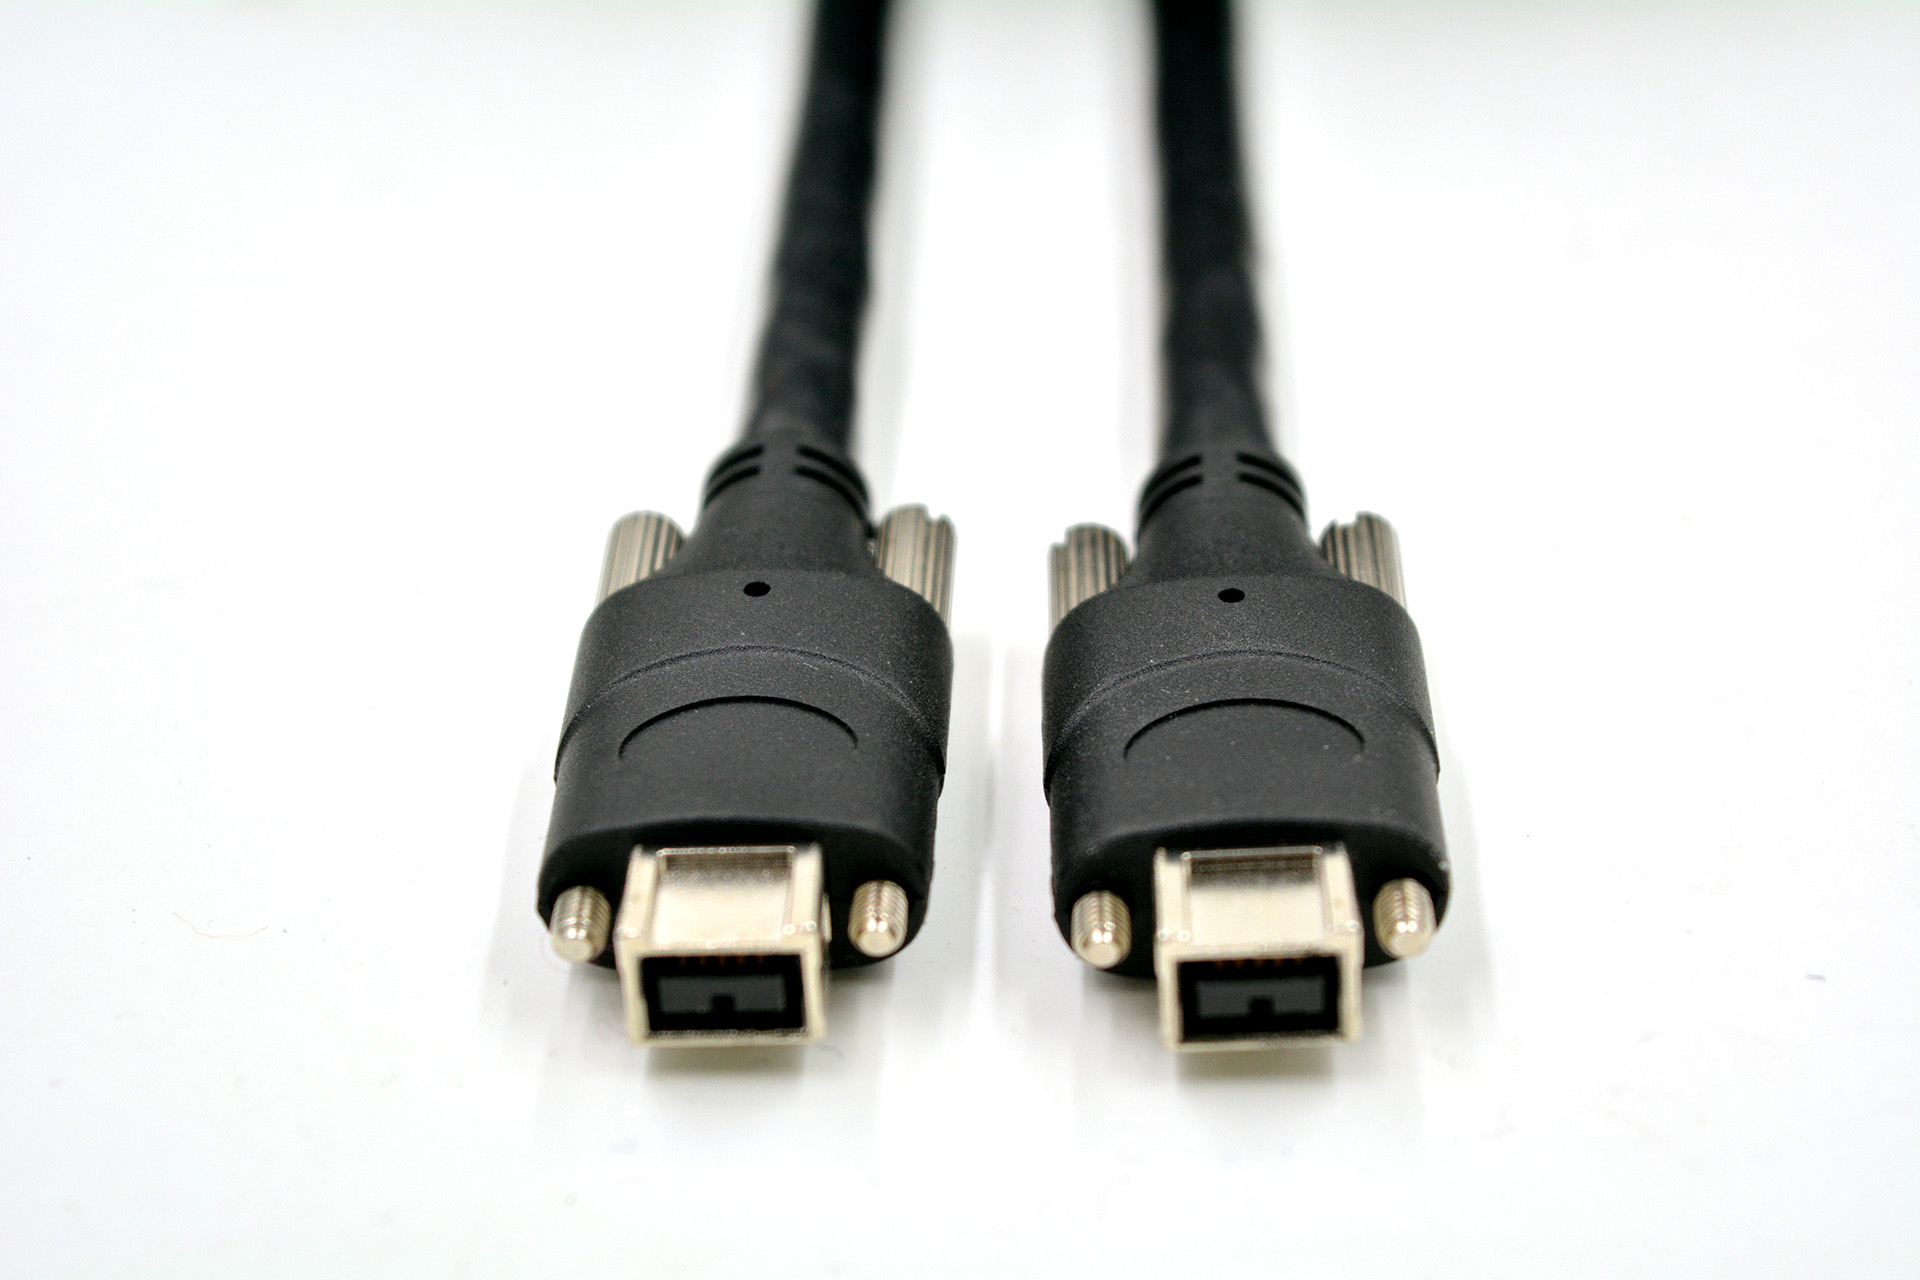 1394 B 9-pin cable with locking screws